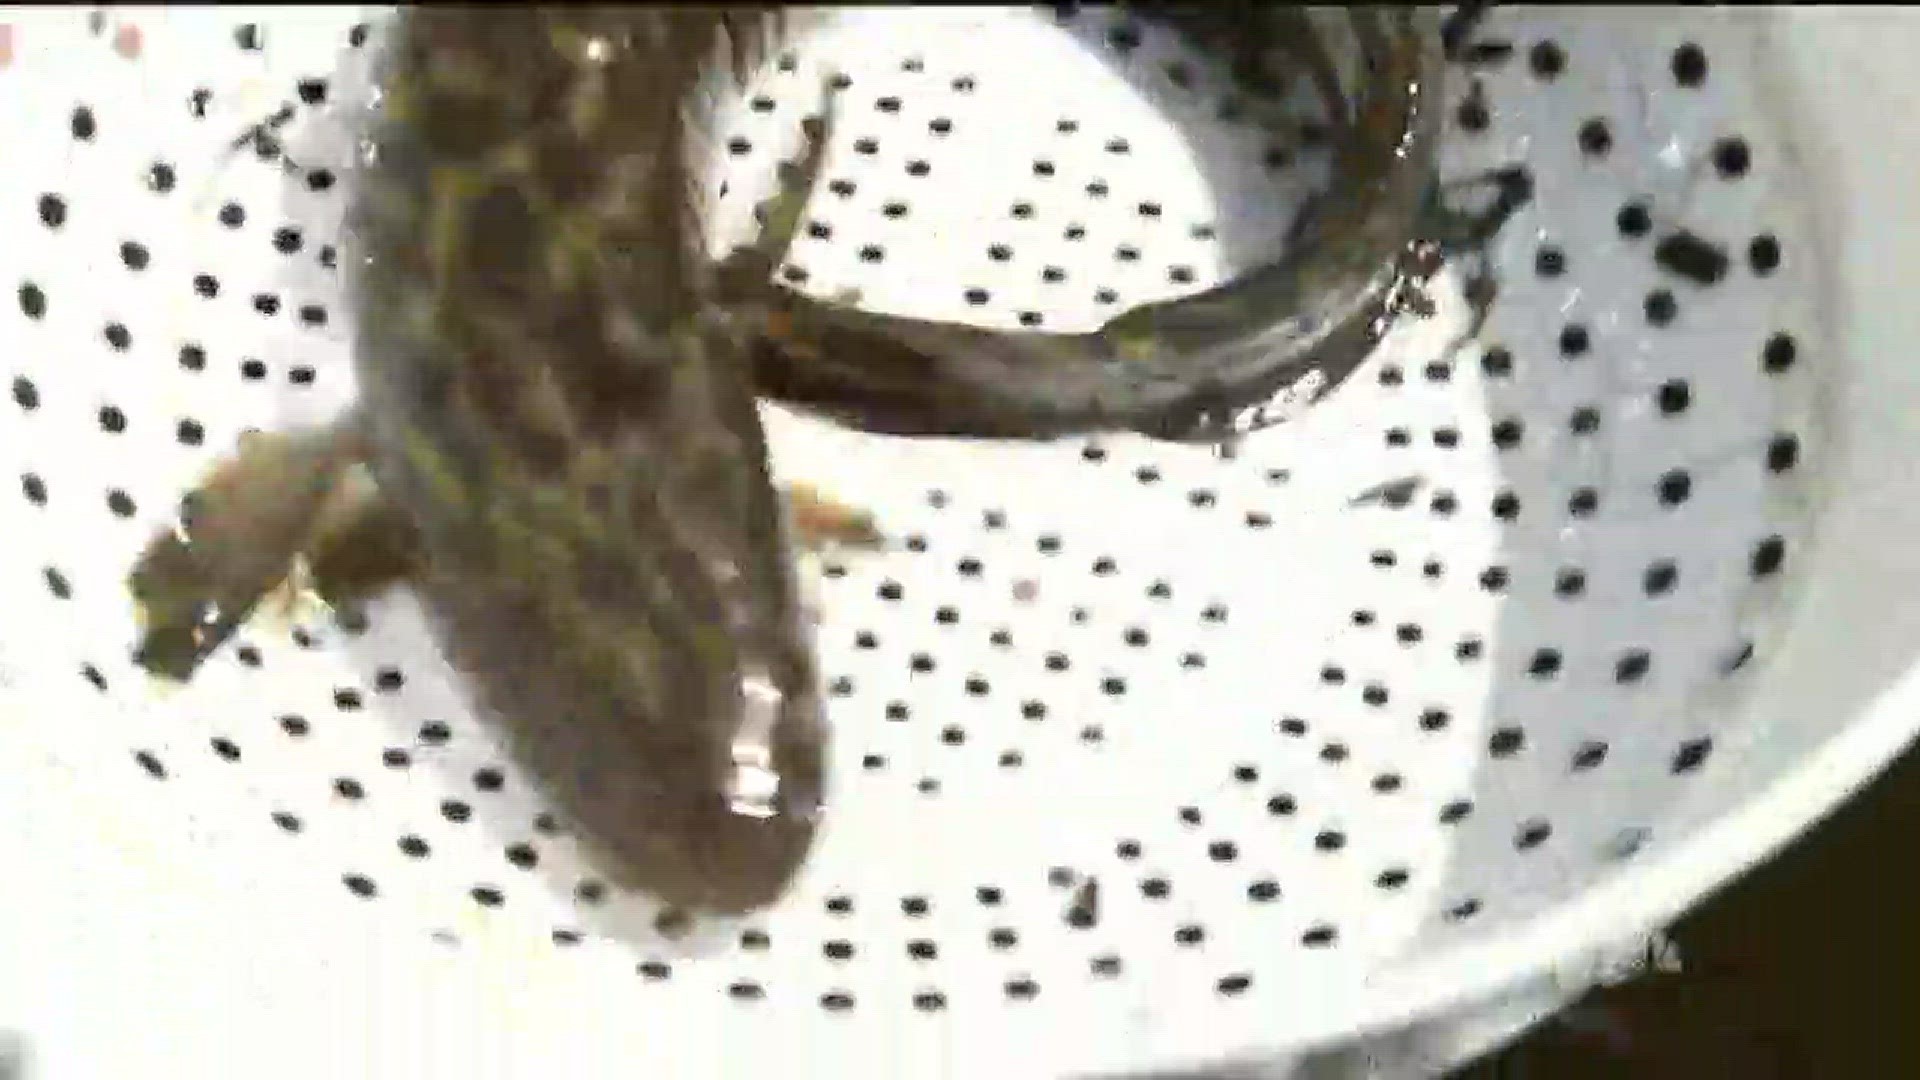 The Minnesota Pollution Control Agency is reviewing all 80 Minnesota watersheds to determine water quality. And the fish are helping. http://kare11.tv/2sYZZnf